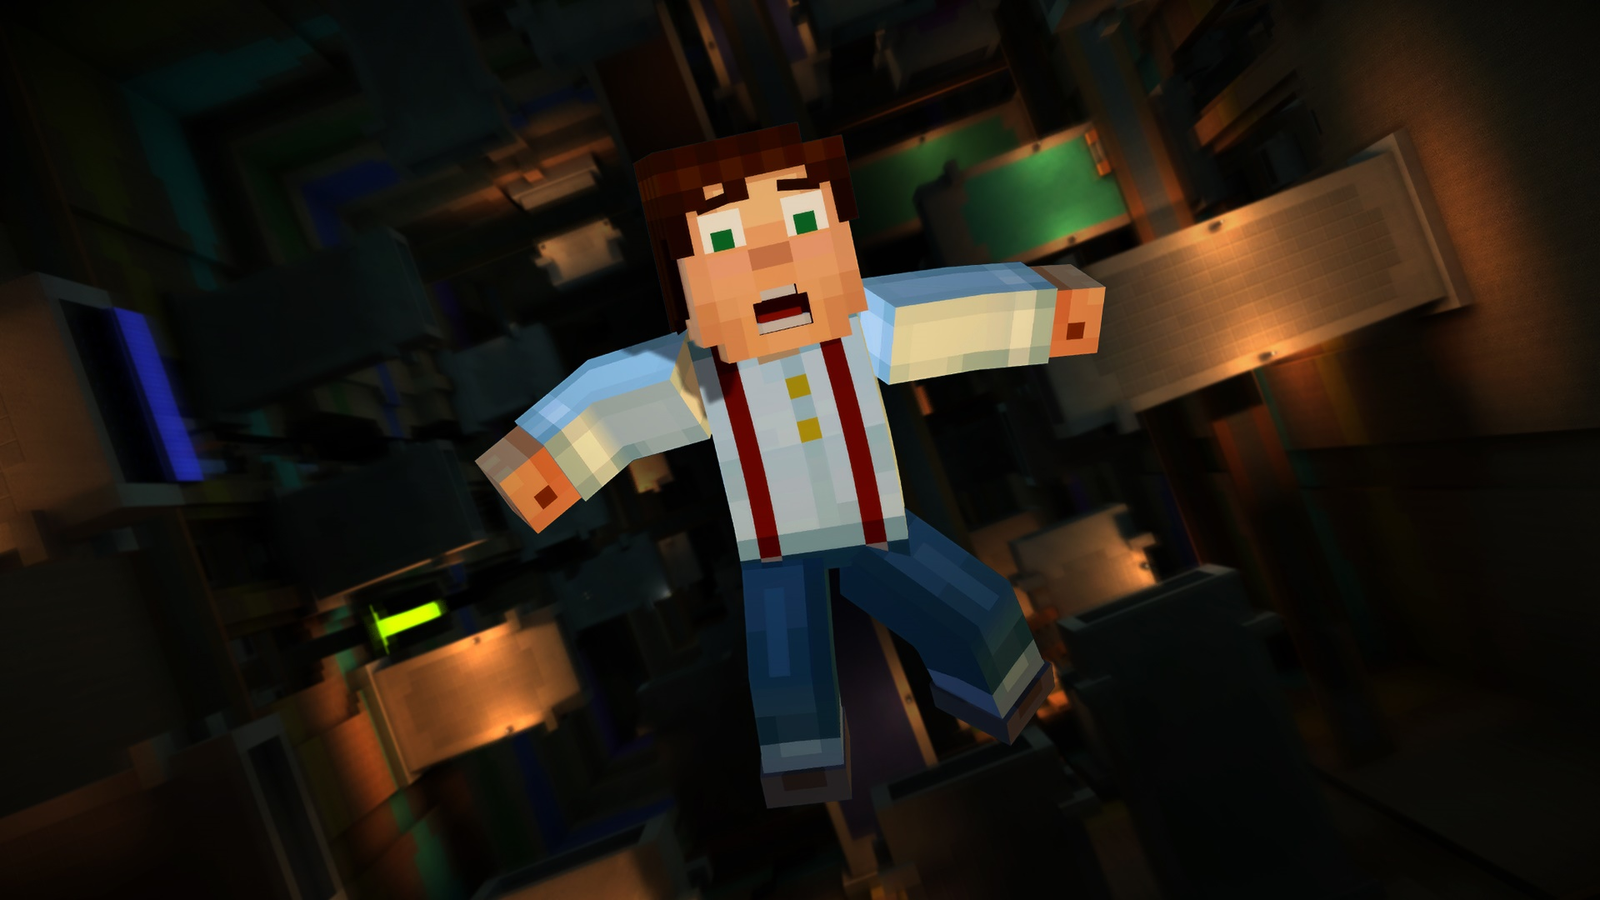 Minecraft Story Mode: Season 2 Finale Happening this Month